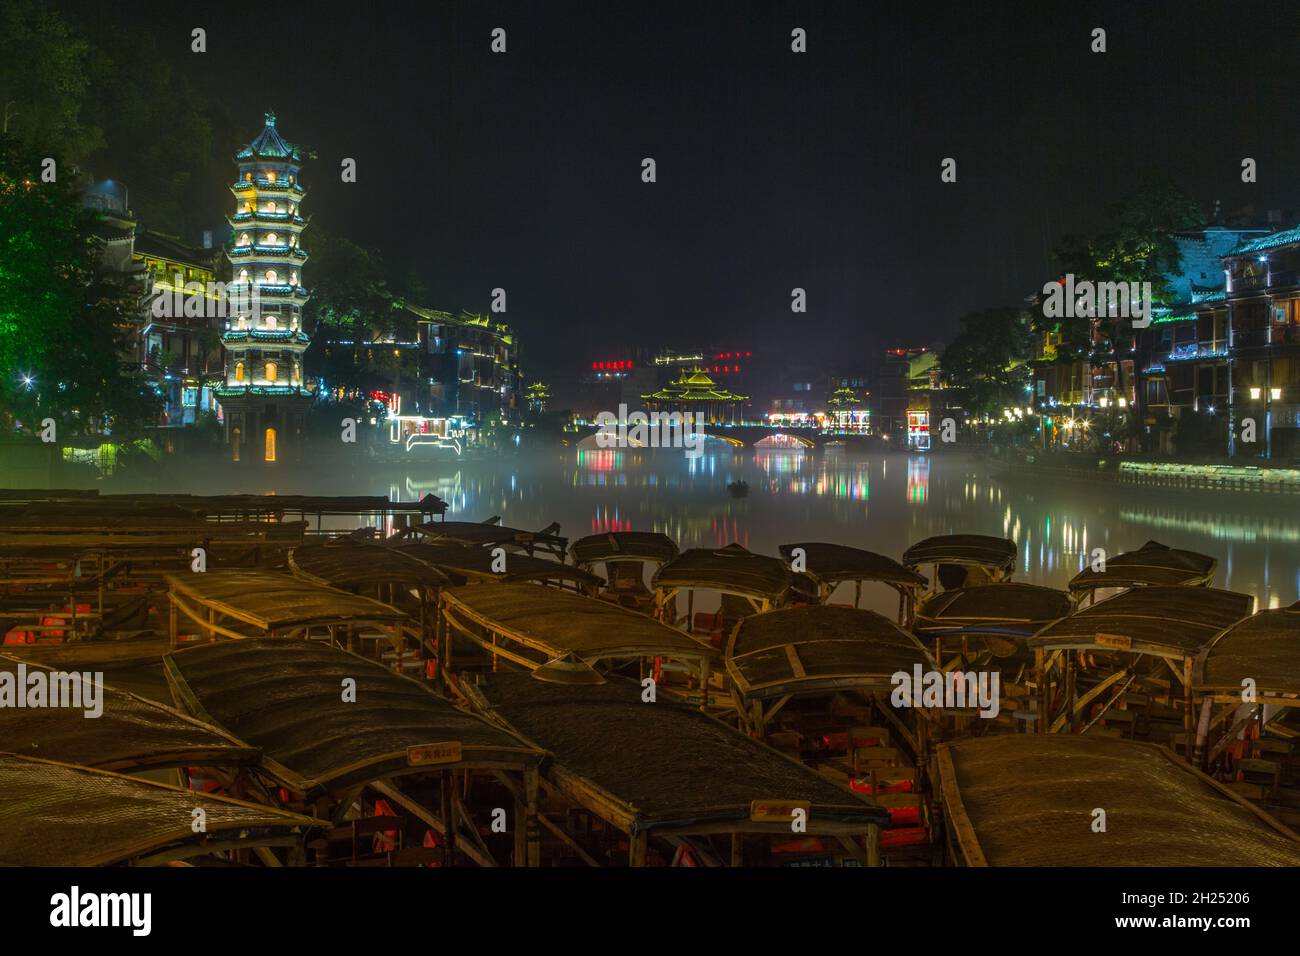 The Wanming Pagoda and covered boats on the Tuojiang River at night in Fenghuang, China. Stock Photo